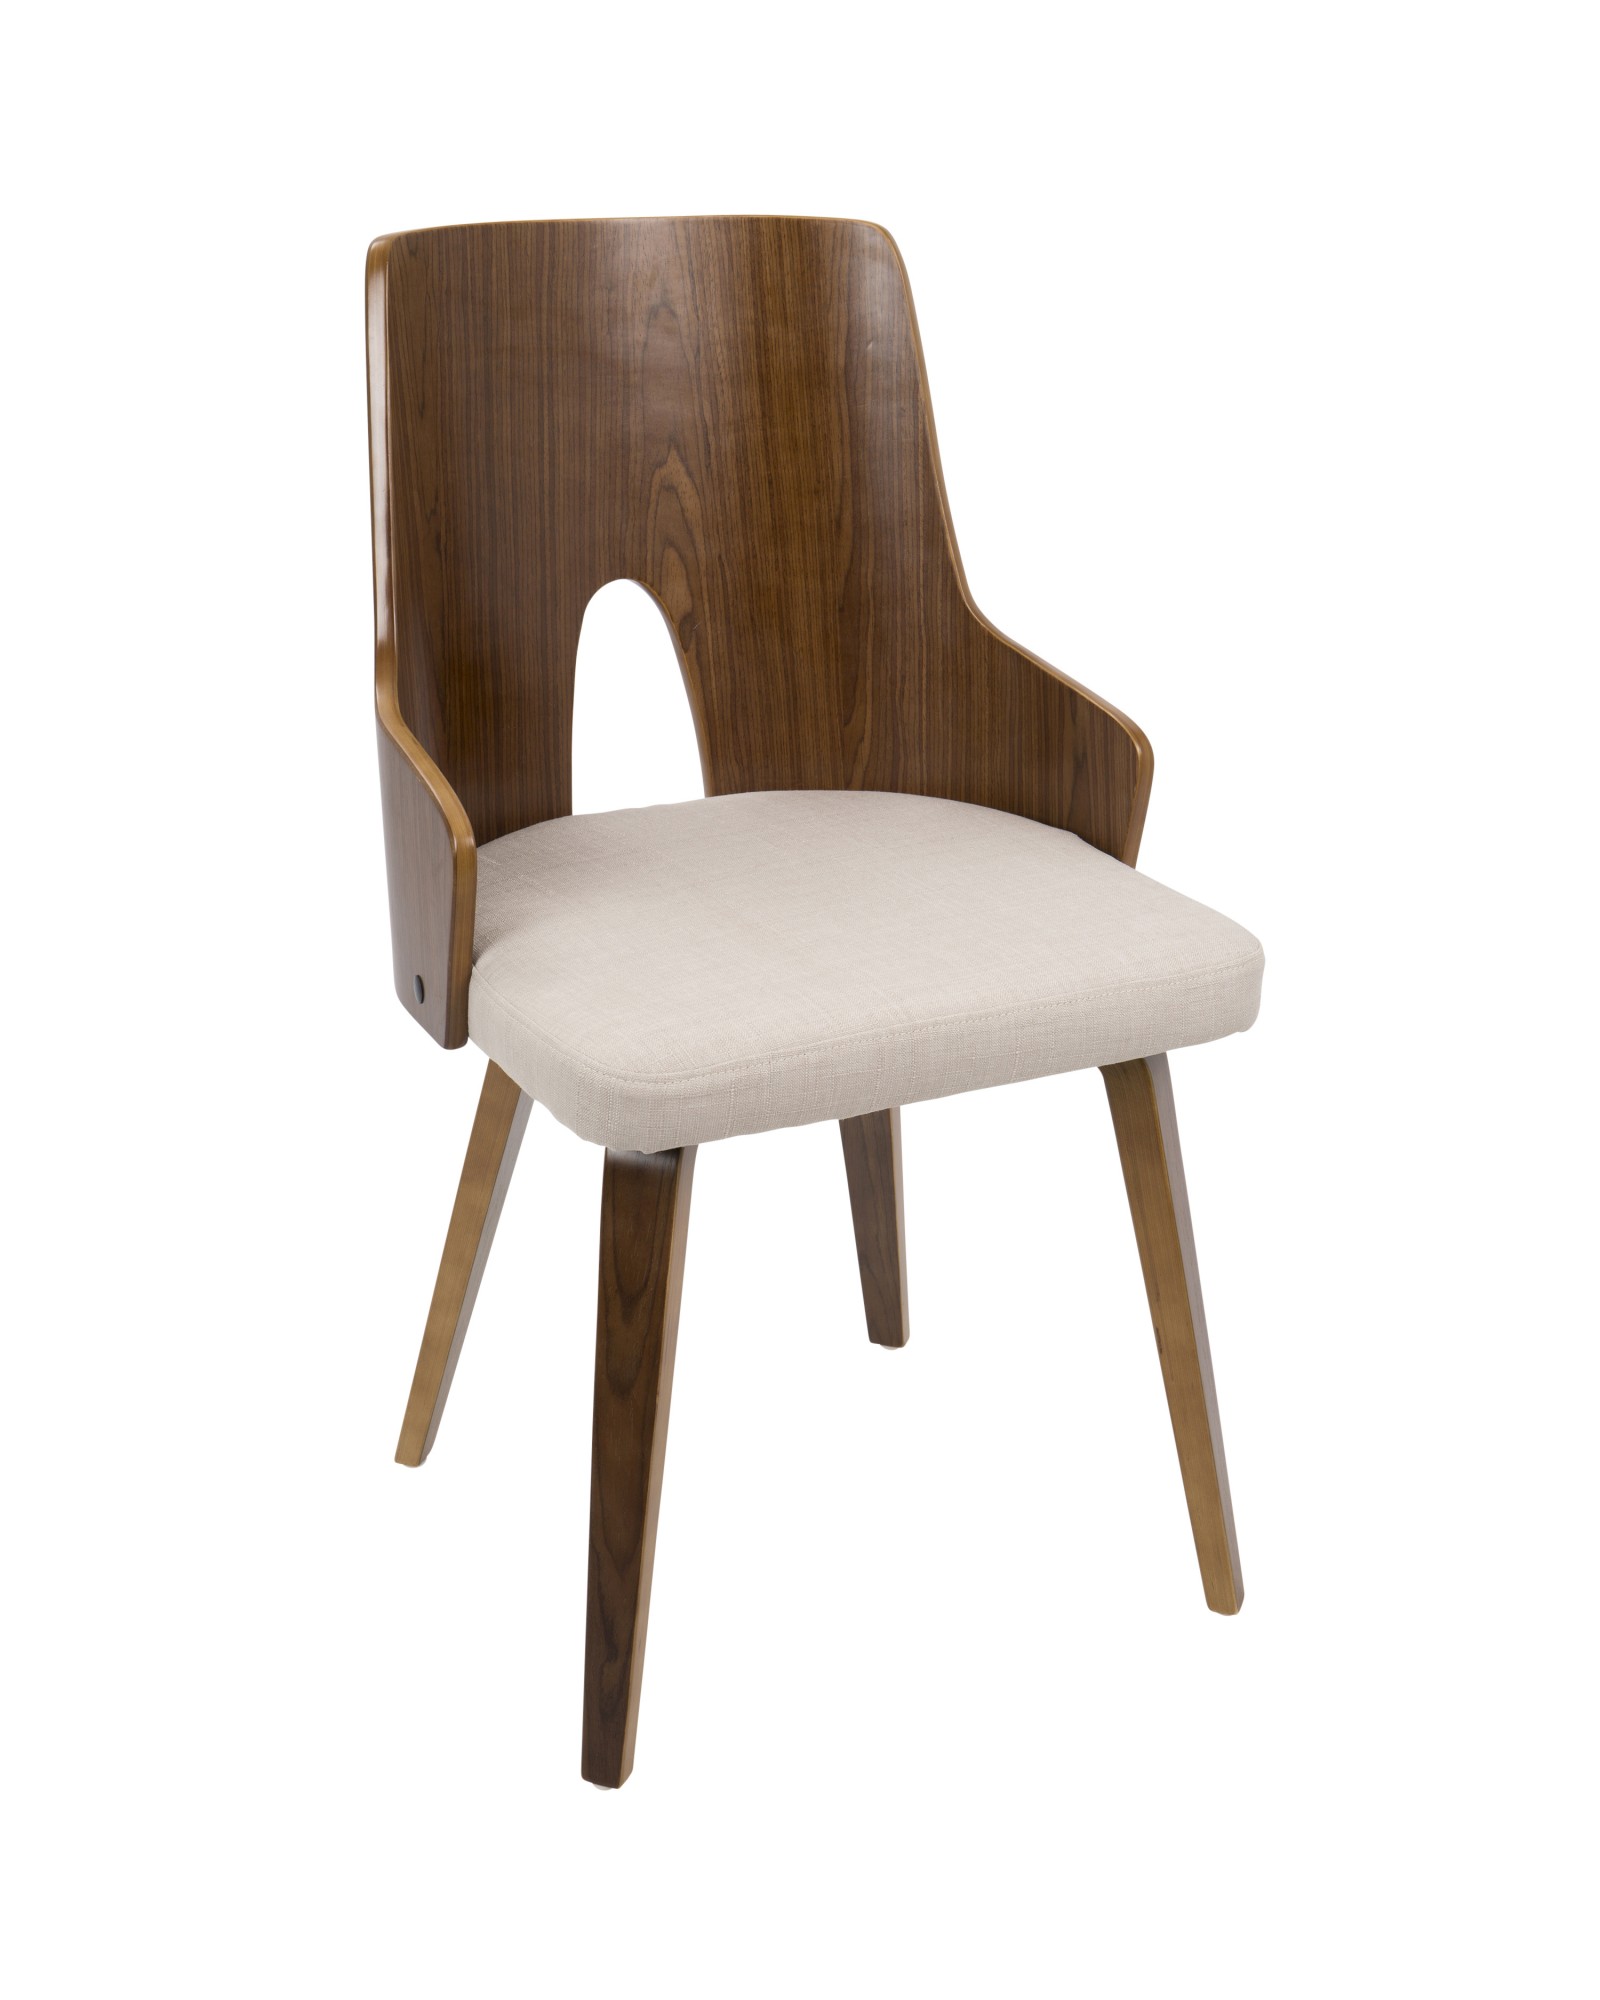 Ariana Mid-Century Modern Dining/Accent Chair in Walnut and Beige Fabric - Set of 2